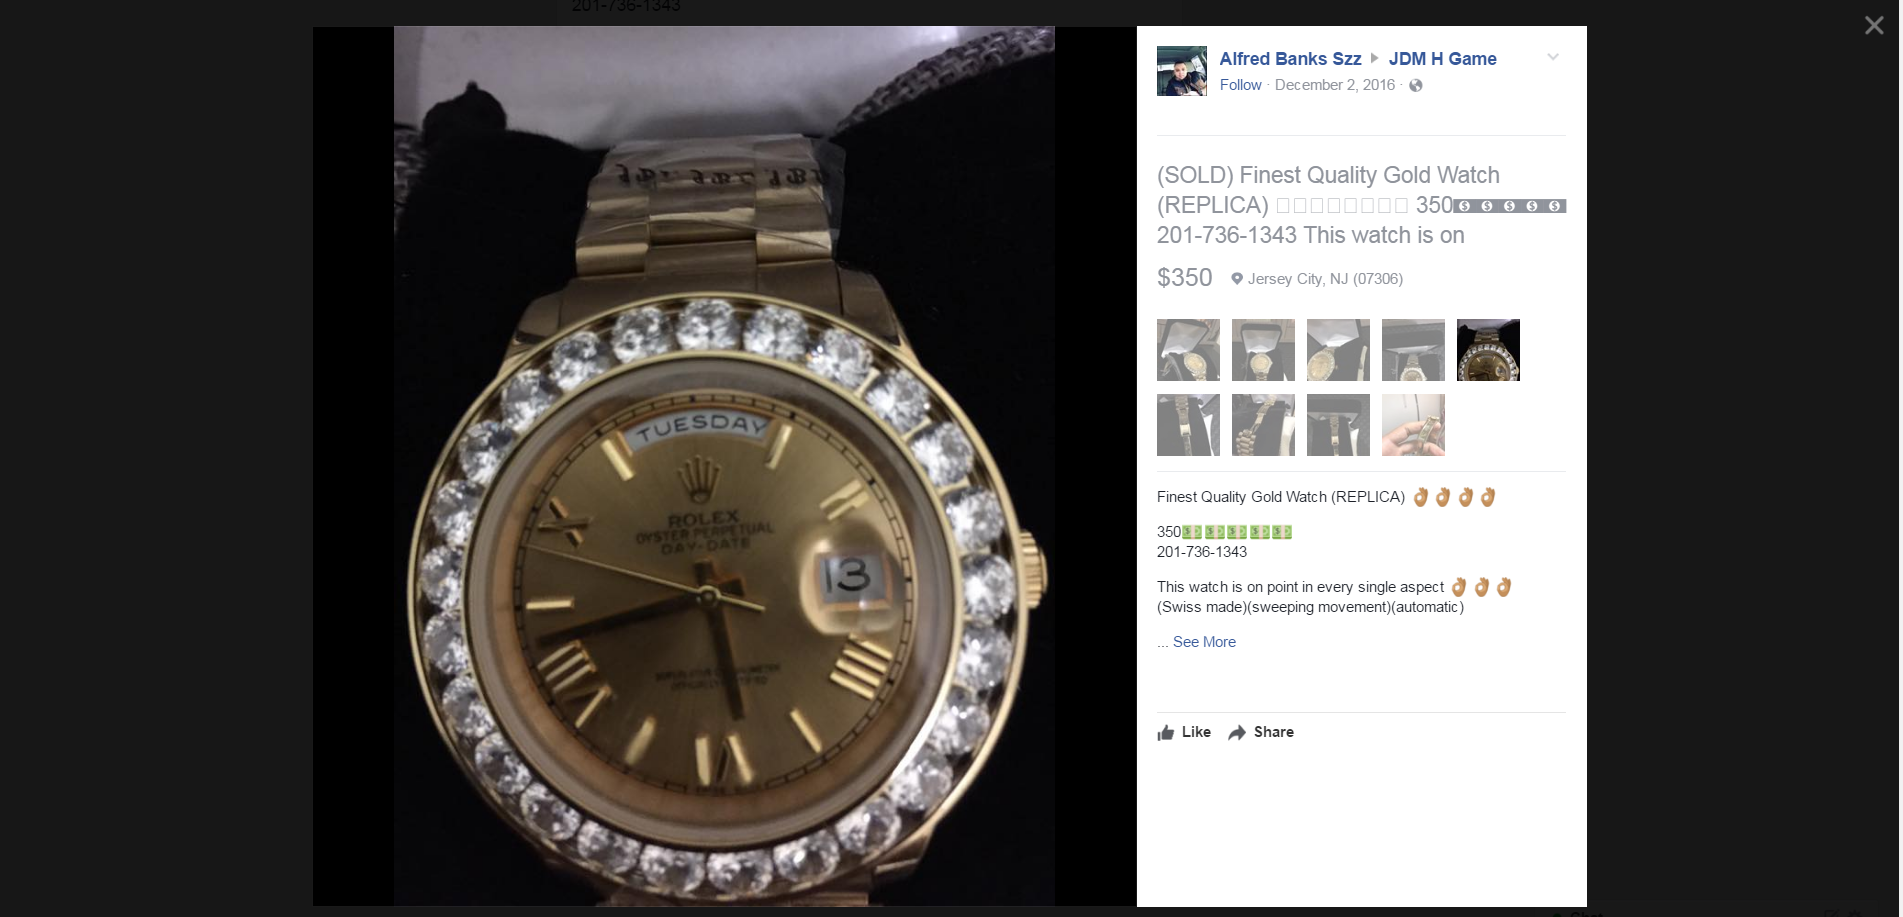 | This is another one of his Facebook ads for a sold counterfeit Rolex replica watch for $350. |